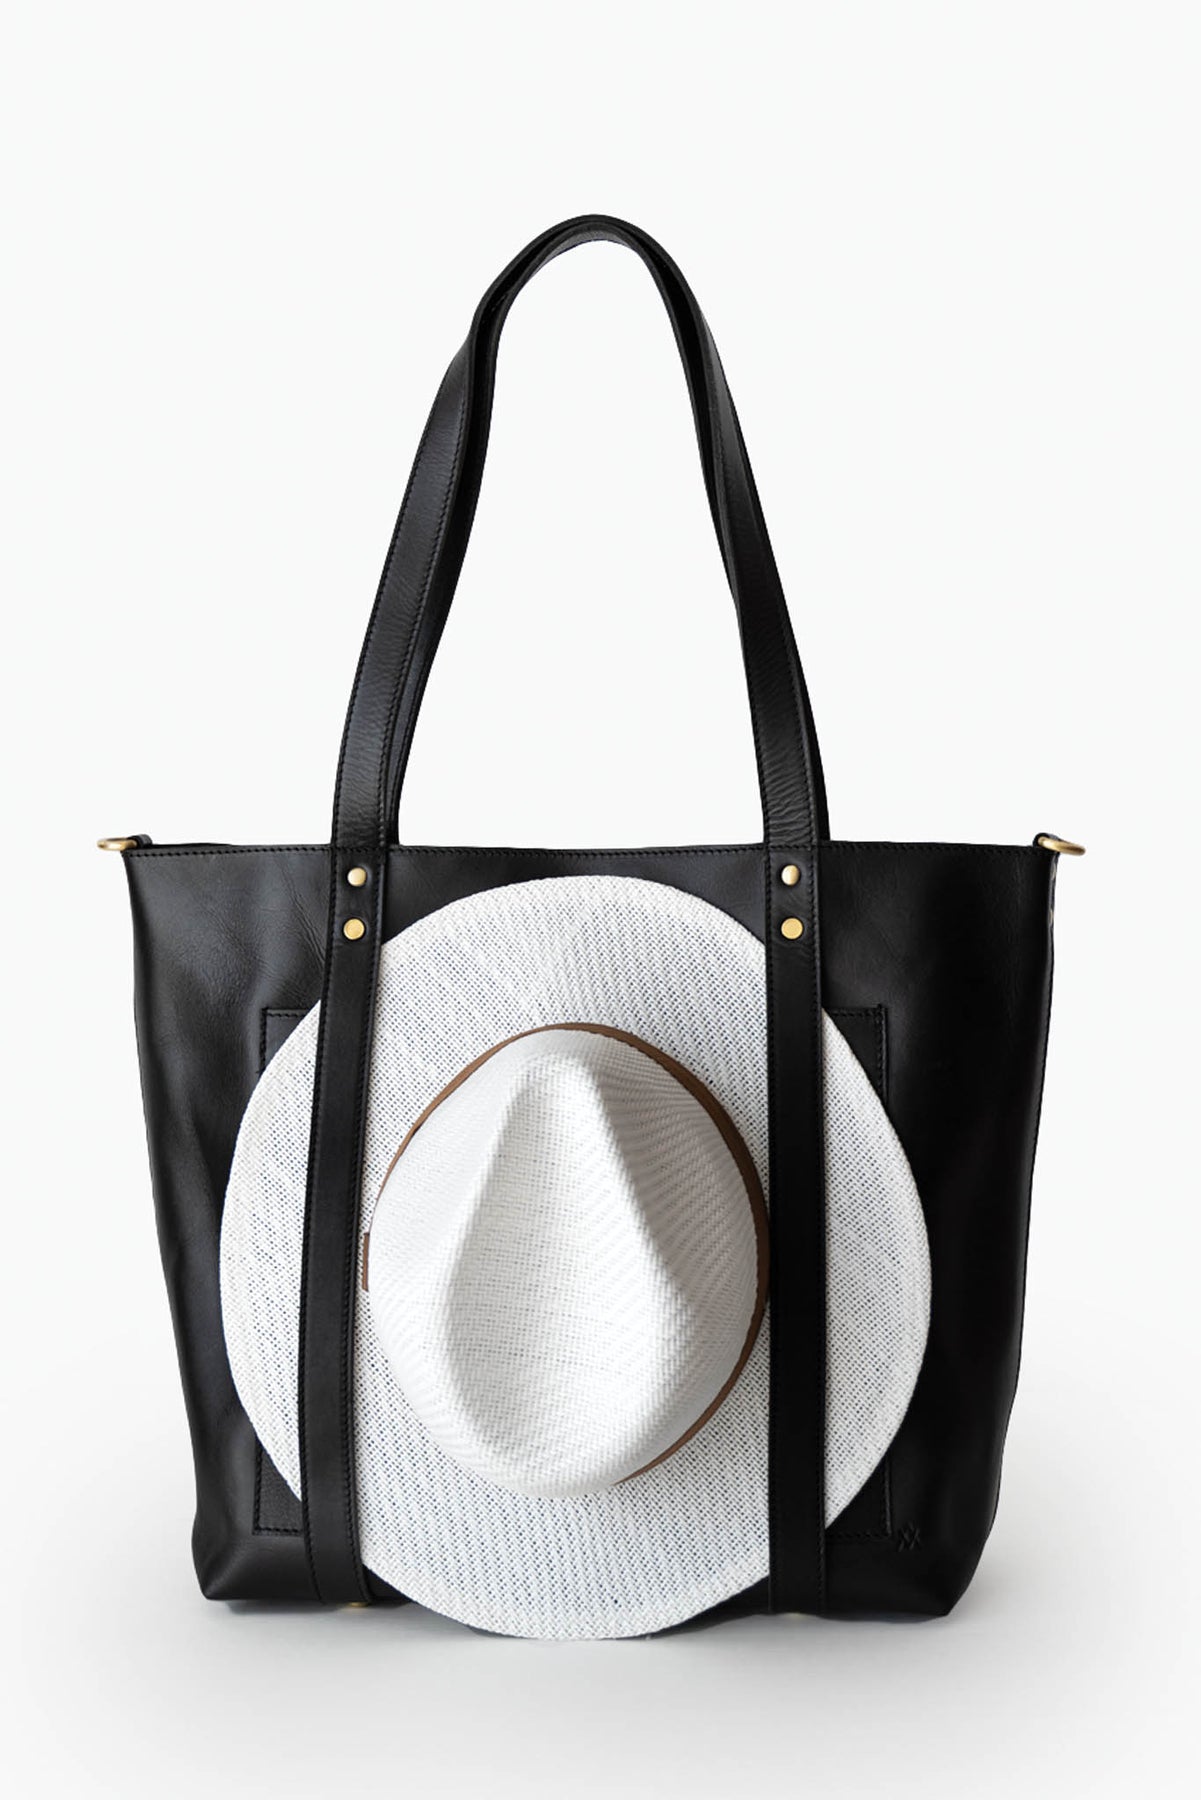 Hat Attack Luxe Stripe Tote in Natural and Black